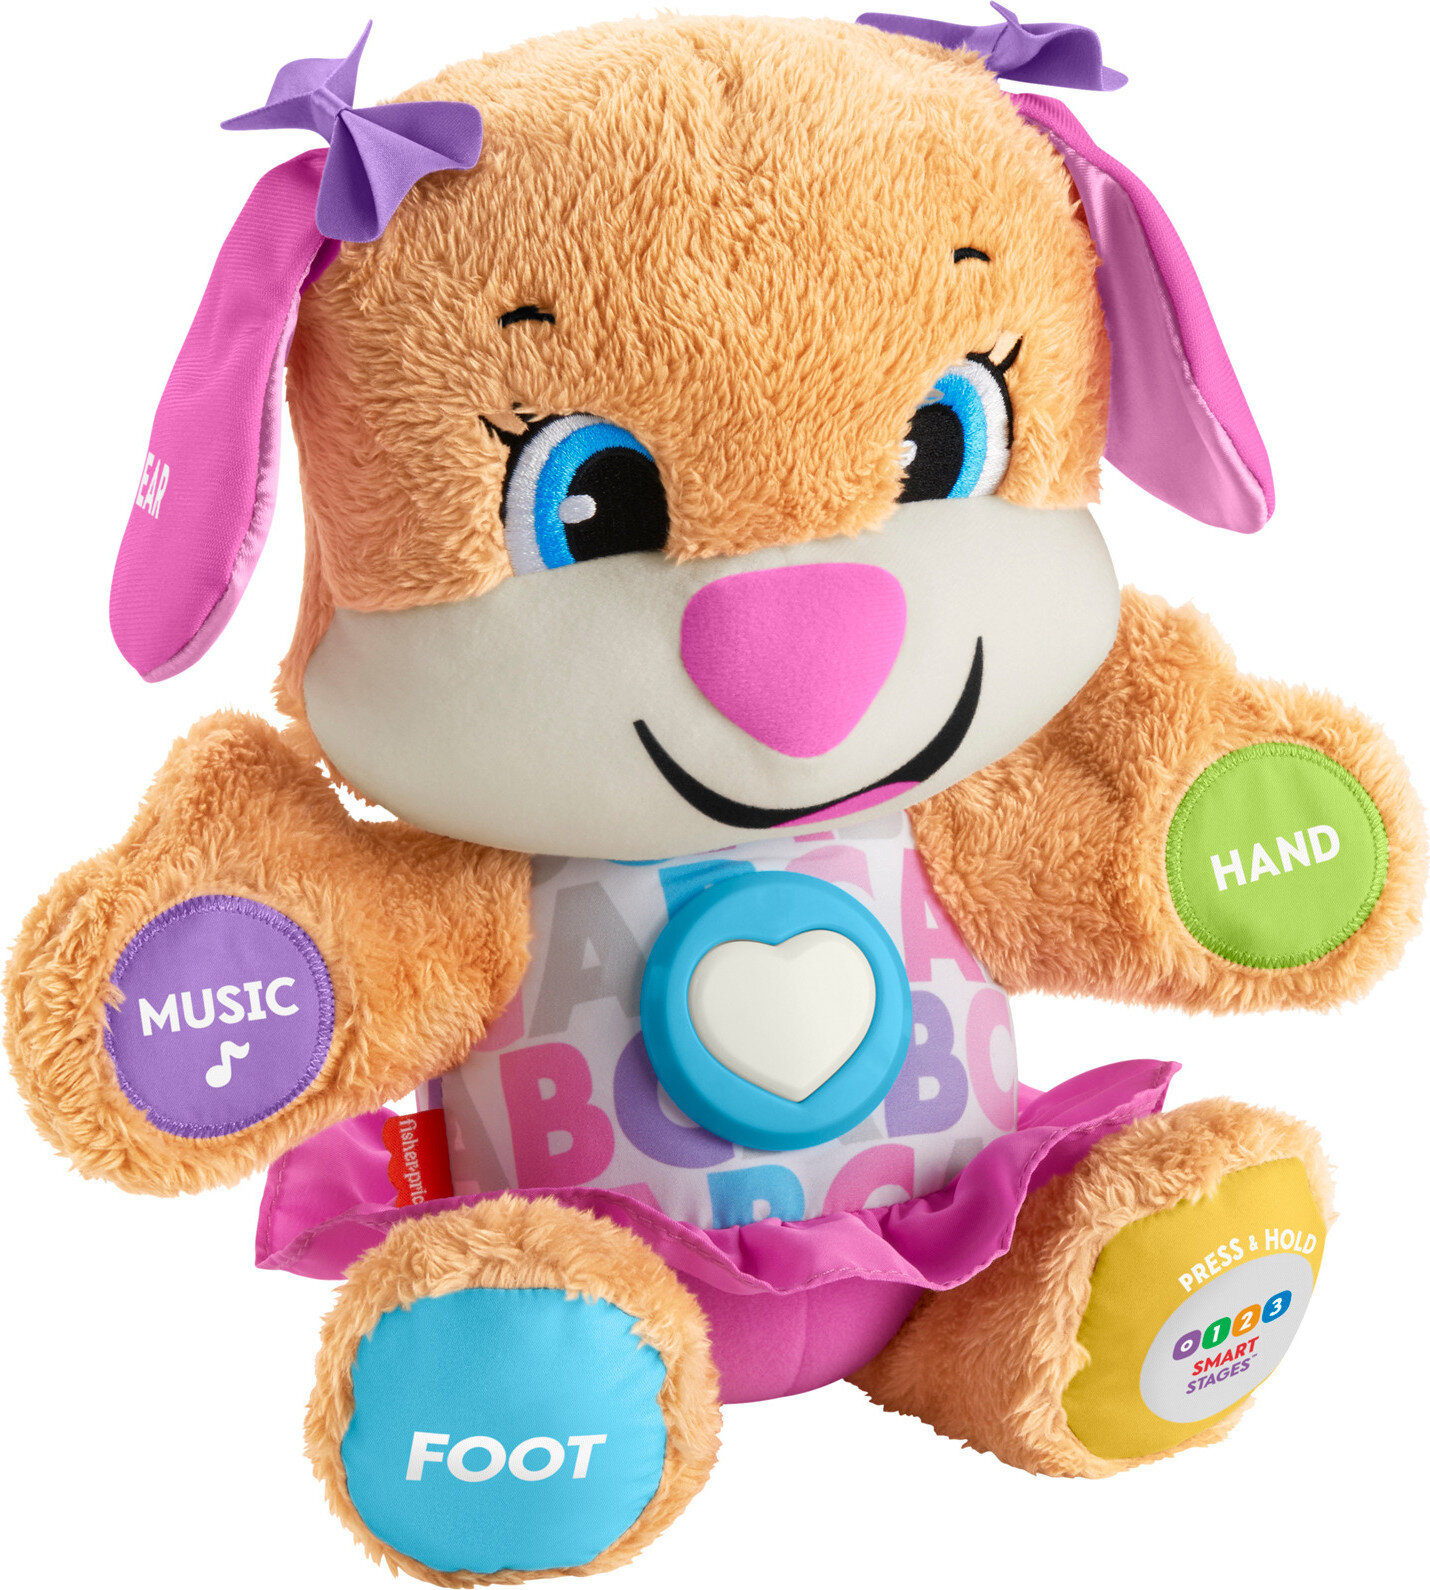 Fisher-Price Laugh & Learn Smart Stages Sis Puppy Plush Learning Toy for Baby, Infants and Toddlers, 6 months and up - image 1 of 8